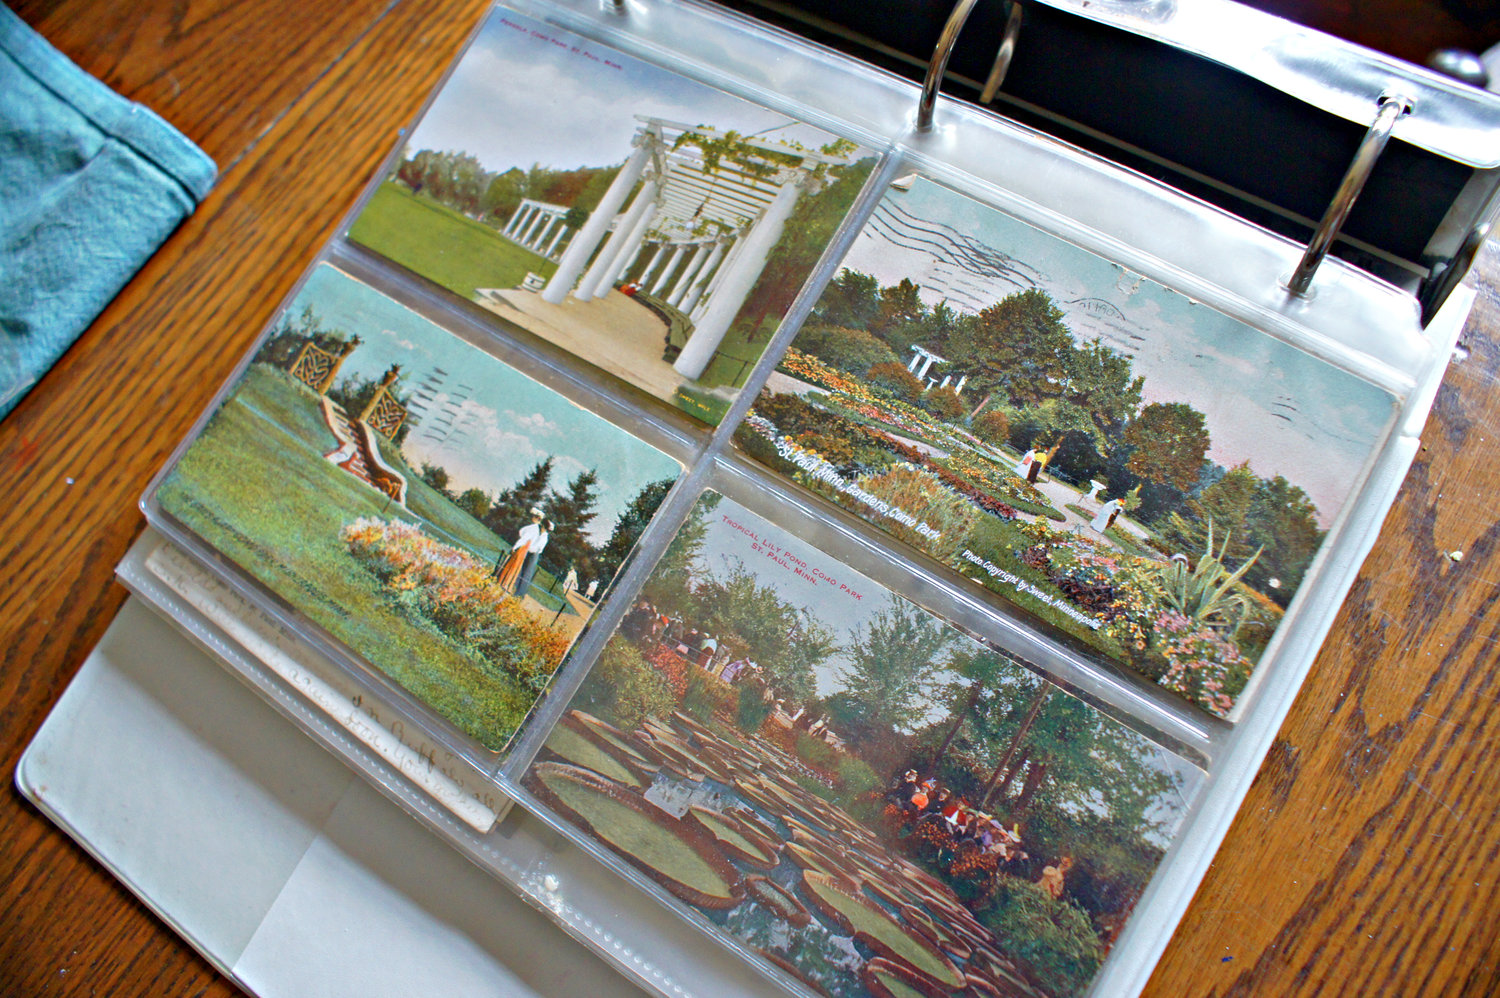 Robin Sherritt won a Minnesota State Fair prize for her post card collection of Como Park. (Photo by Terry Faust)